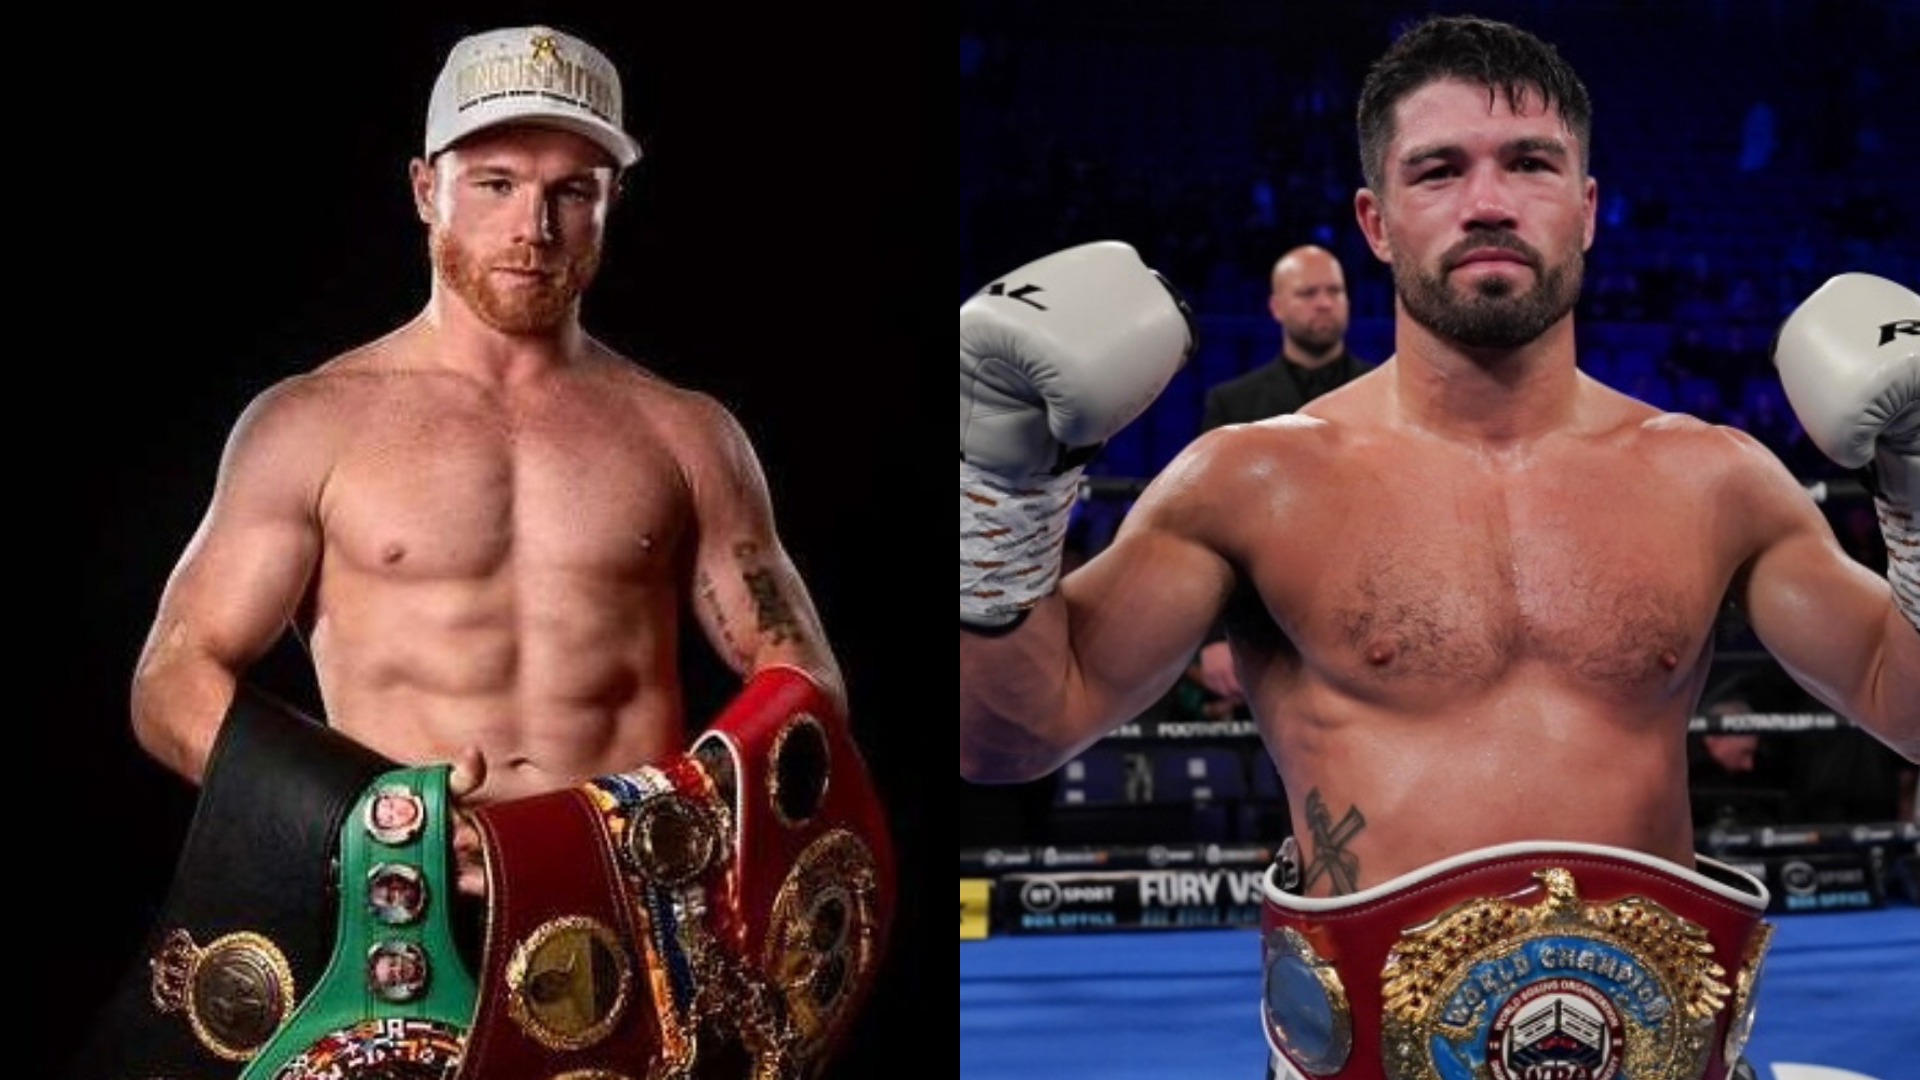 Canelo Alvarez vs John Ryder reportedly CONFIRMED for May 6 Location and weight class revealed for Canelo Alvarez fight, CHECK Canelo vs Ryder details